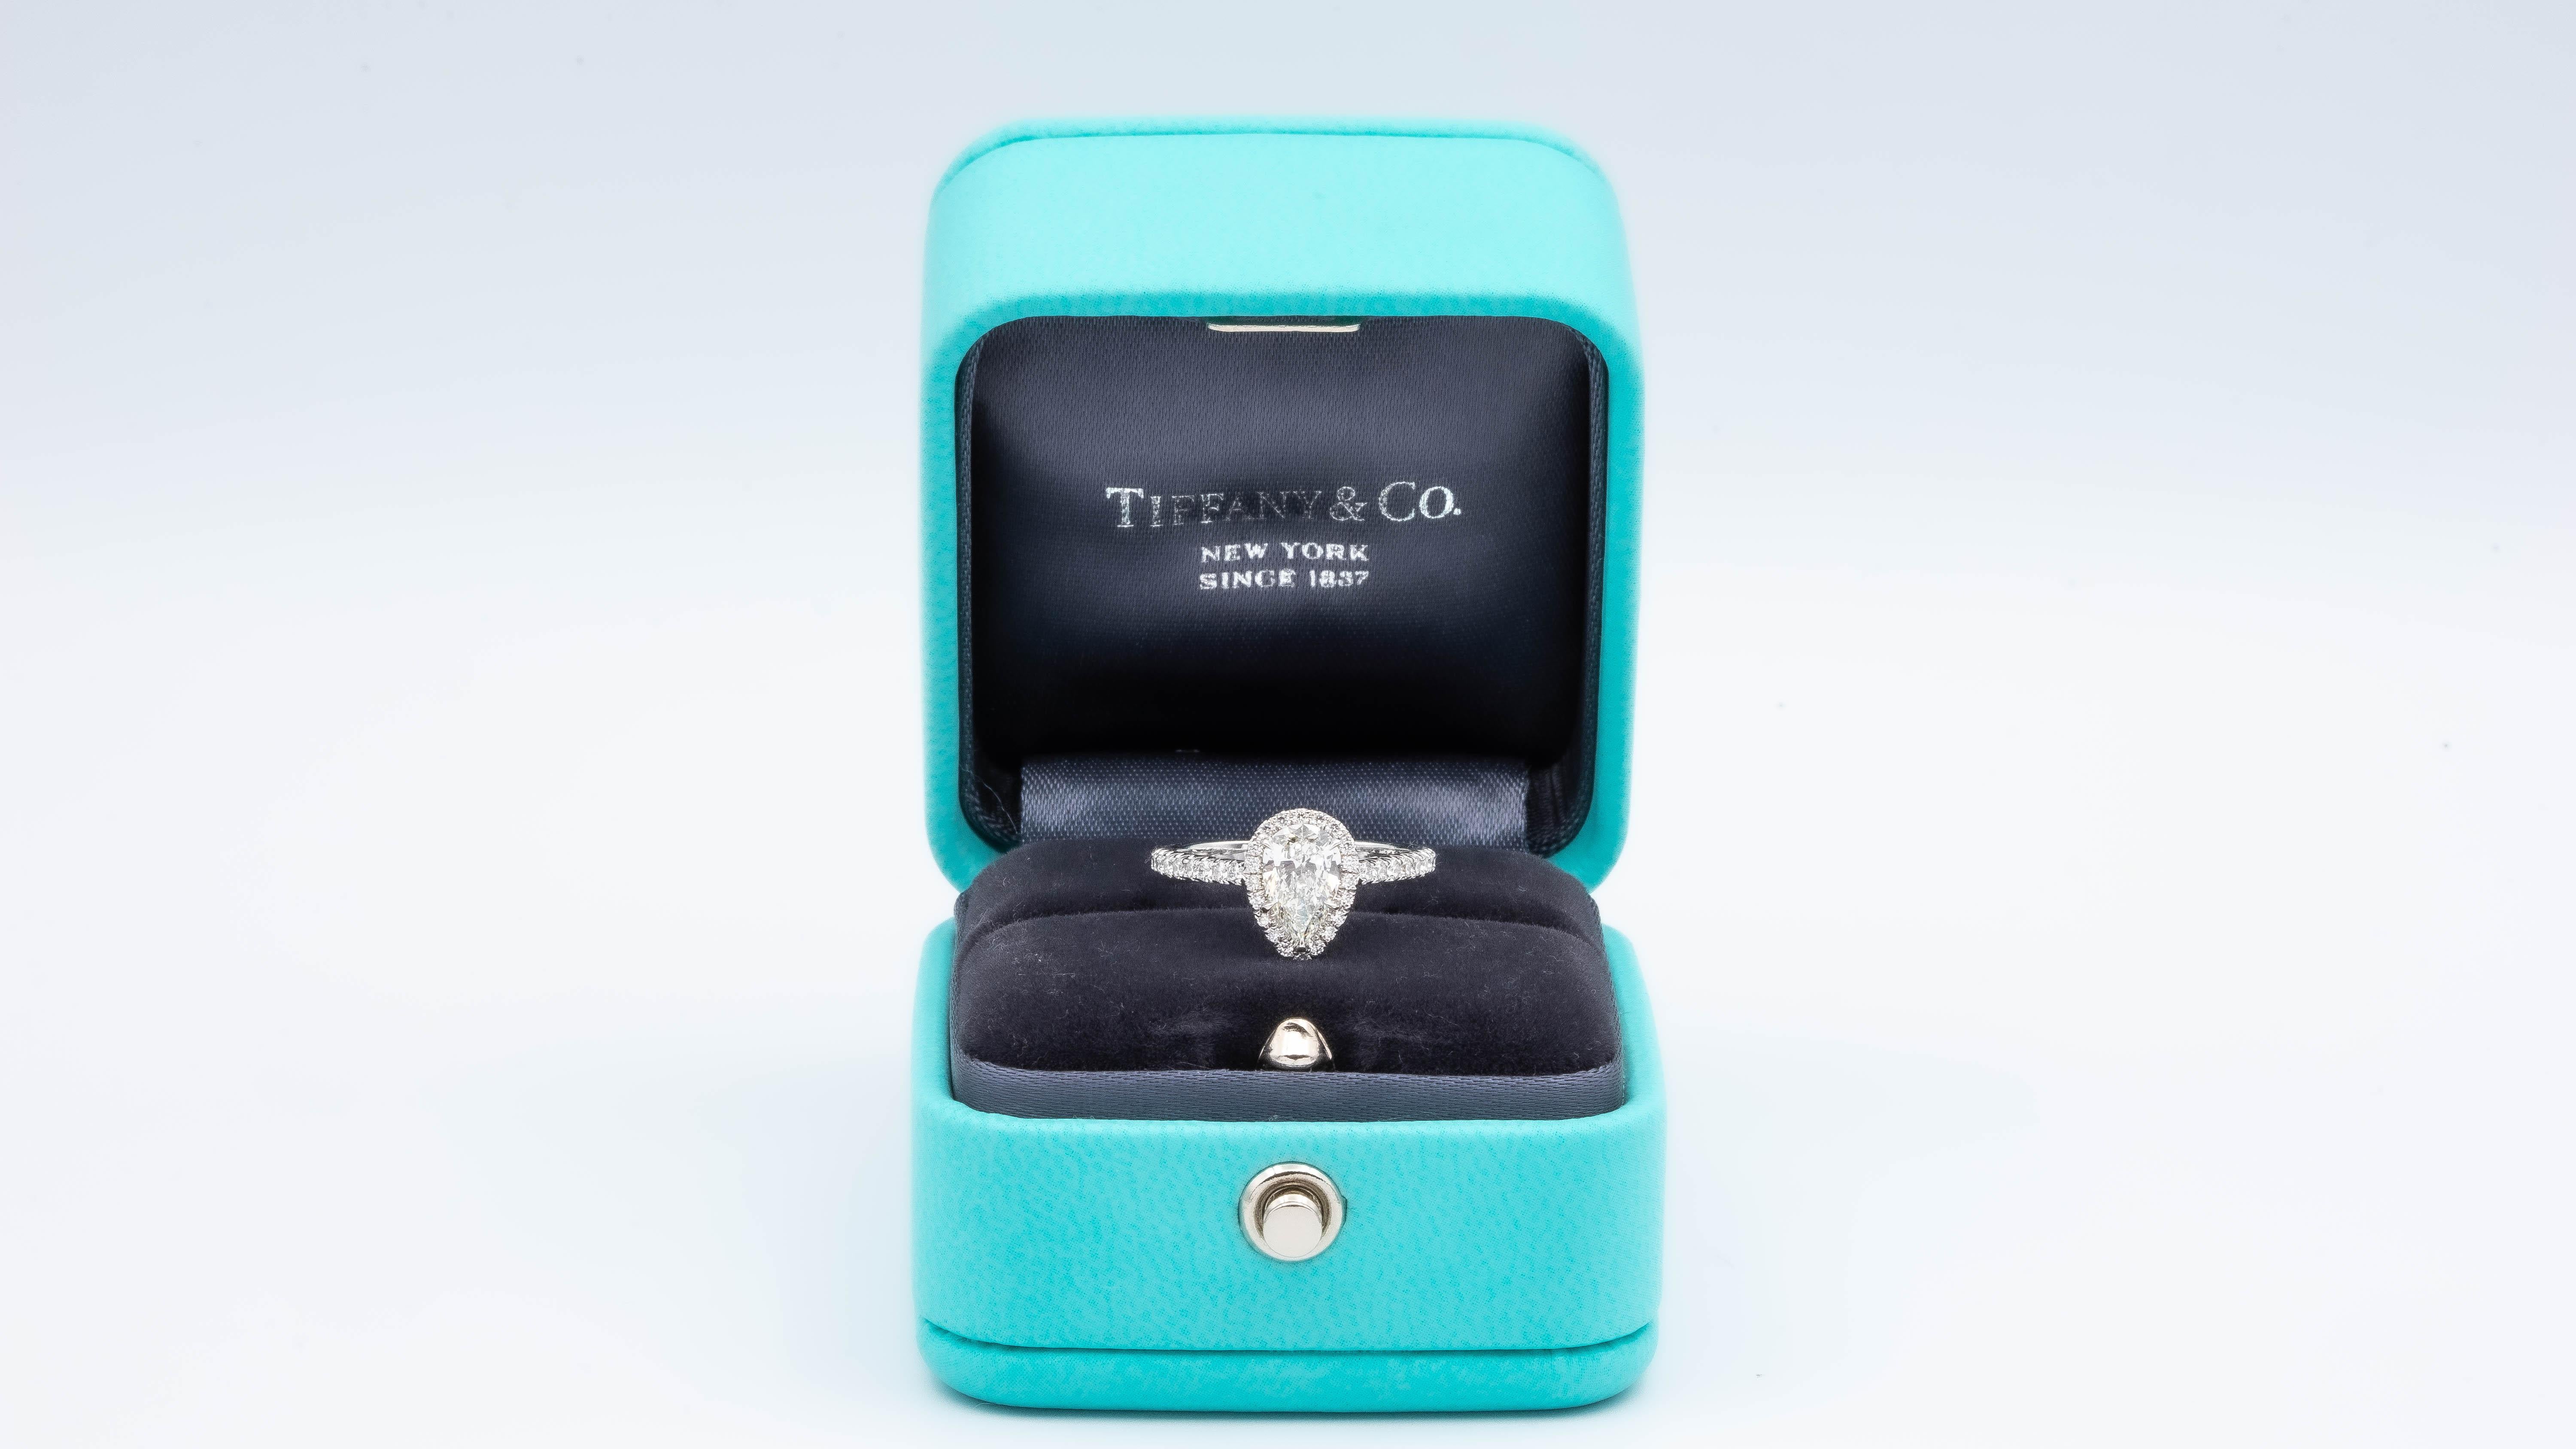 Tiffany & Co. Soleste Diamond Engagement ring featuring a 0.69 ct Pear Shape Center diamond finely crafted in Platinum, accented by a bead set diamond halo and shank with 40 round brilliant cut diamonds weighing 0.40 cts. total weight